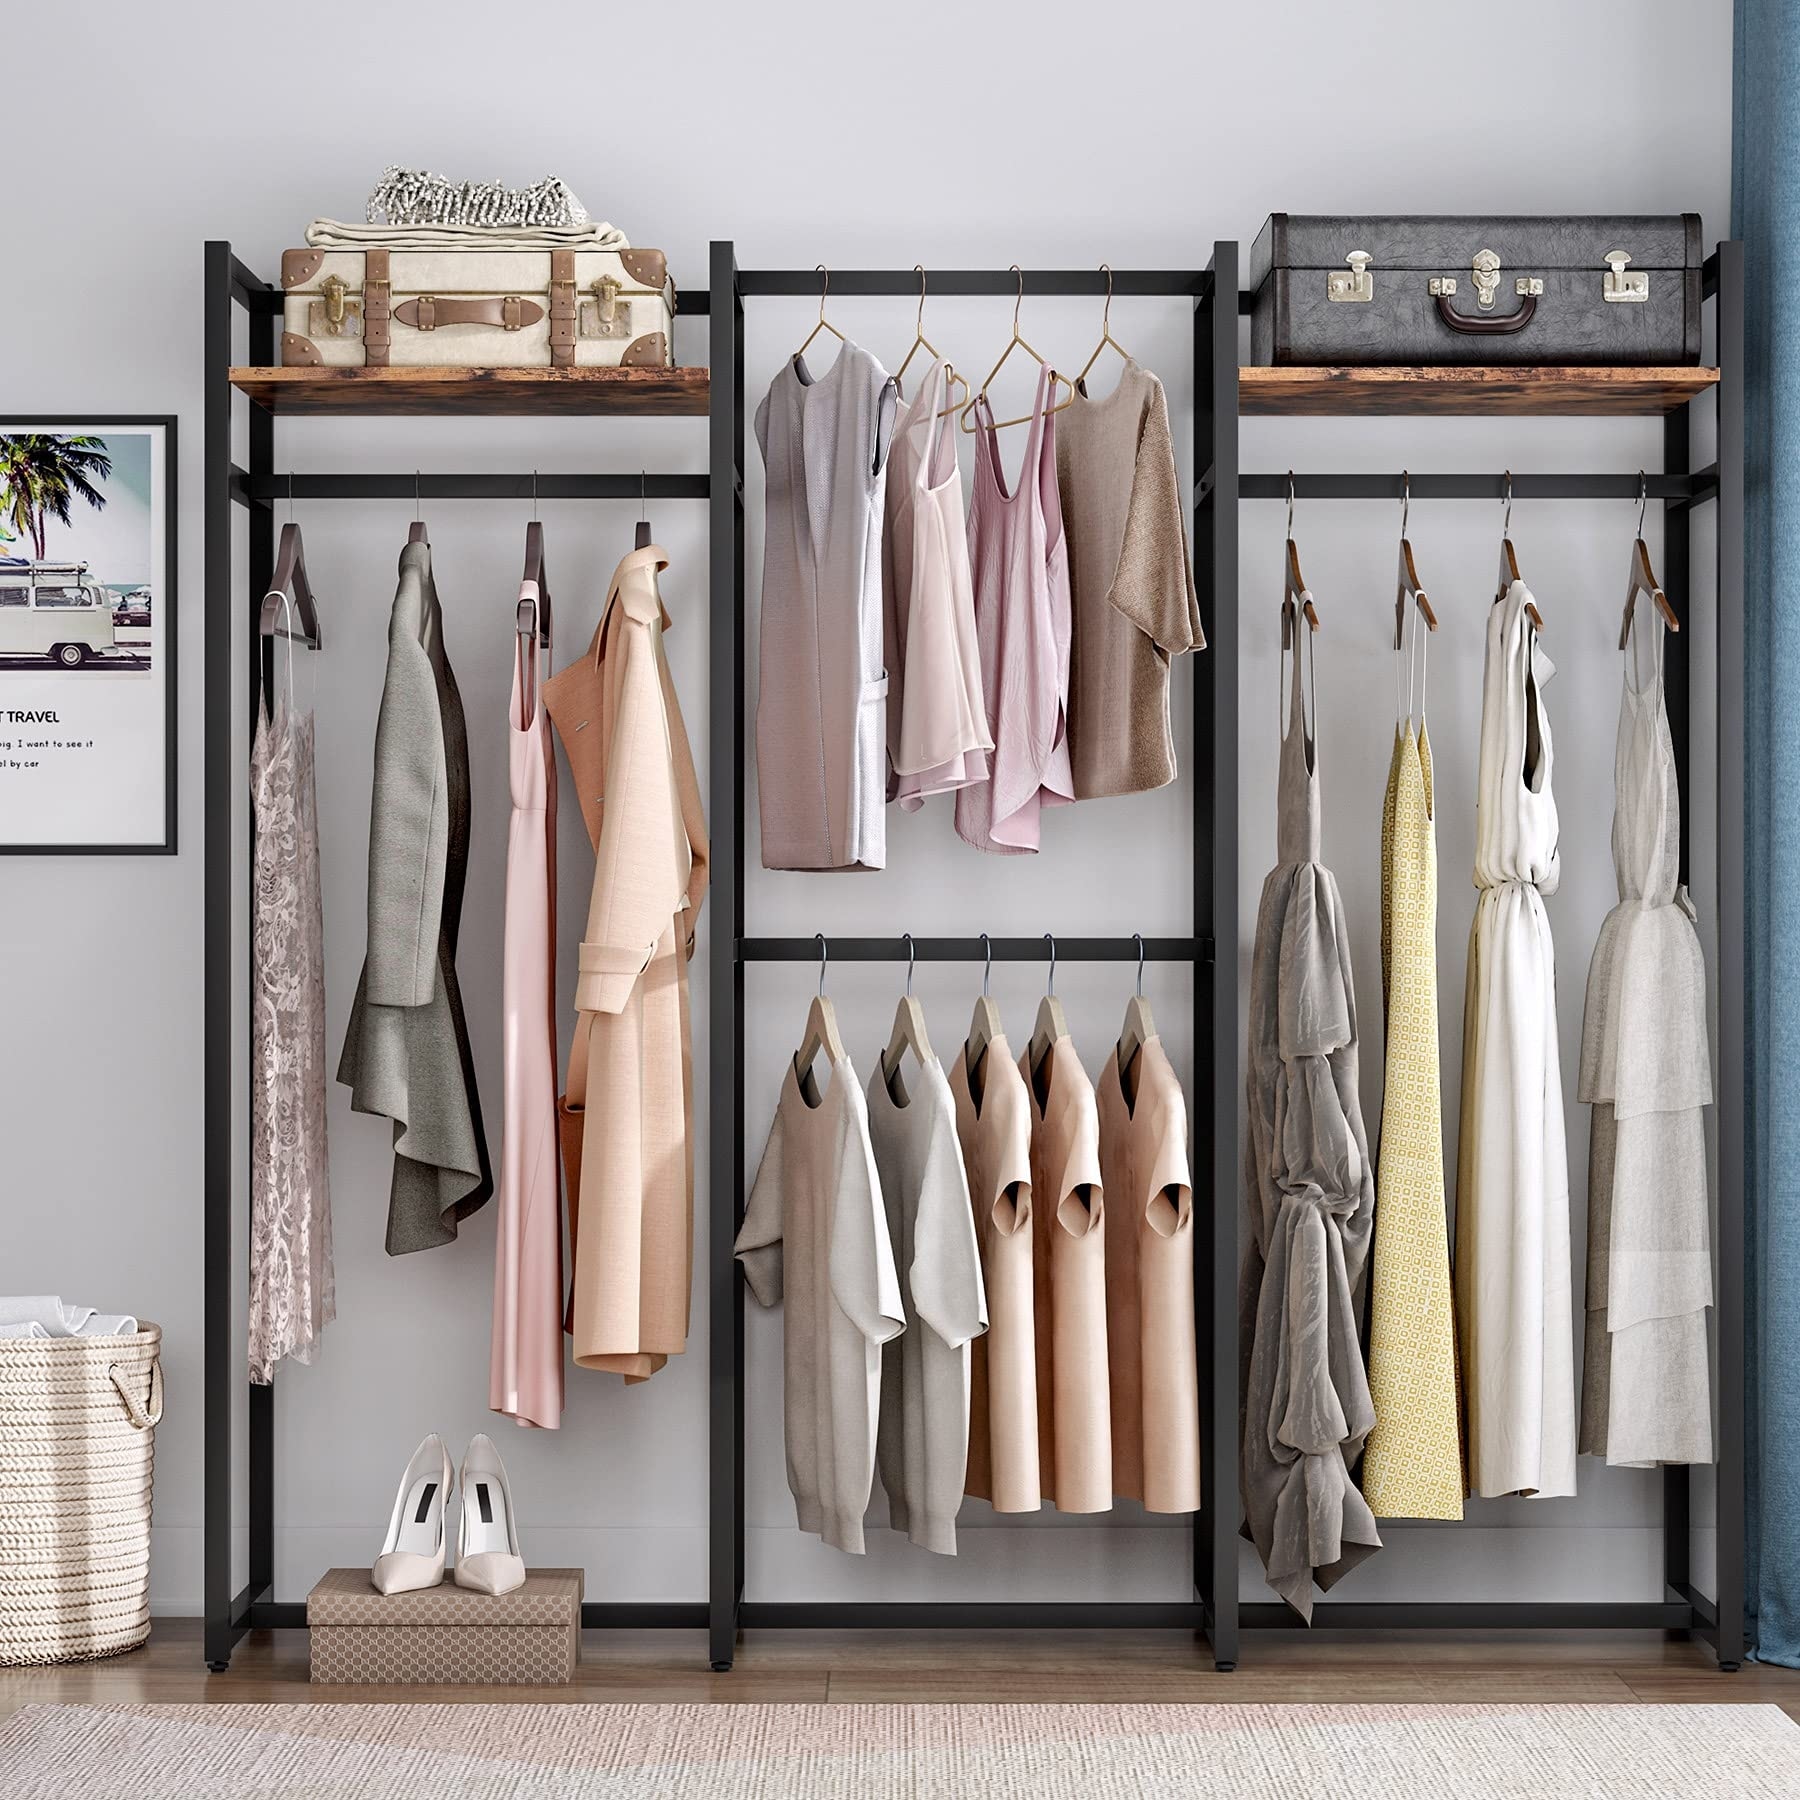 https://ak1.ostkcdn.com/images/products/is/images/direct/f188d7c4e810de4bd43c9cc6df43e7681381db46/Free-Standing-Closet-Organizer-with-Hanging-Rods%2C-Garment-Rack-Heavy-Duty-Clothes-Rack-with-Storage-Shelves%2C-Max-Load-500LBS.jpg